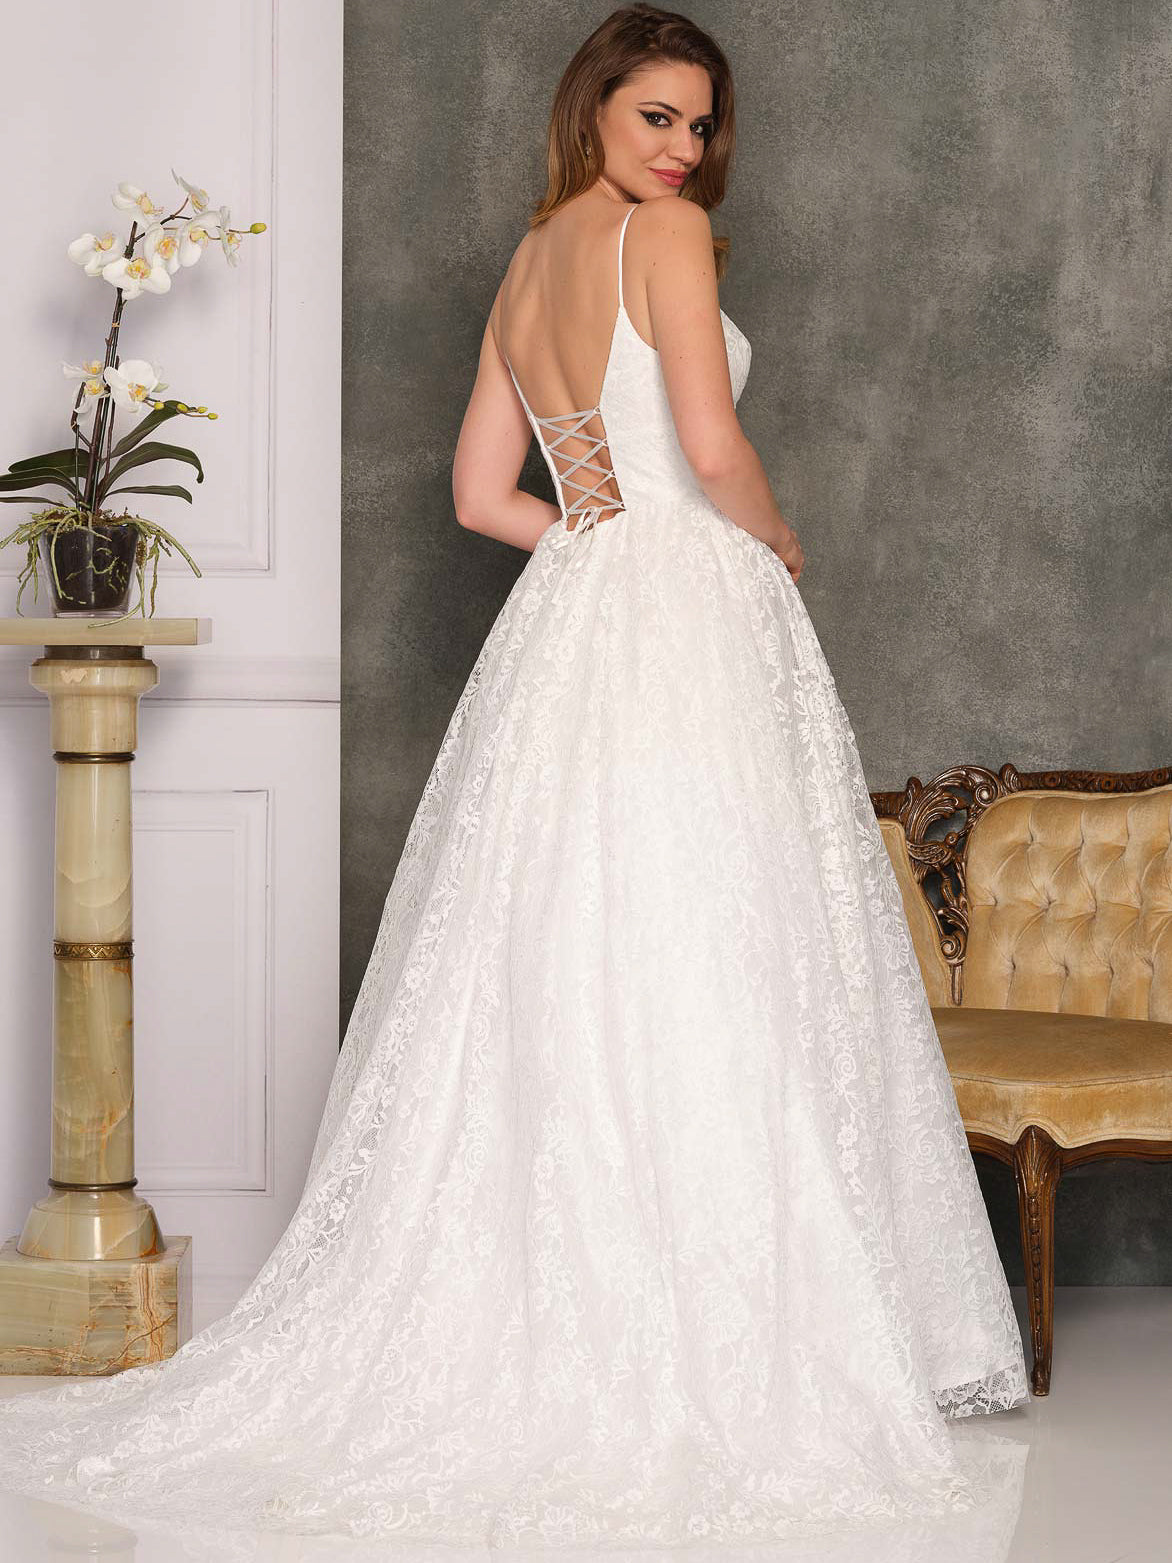 LACE UP PATTERNED BALLGOWN WEDDING GOWN